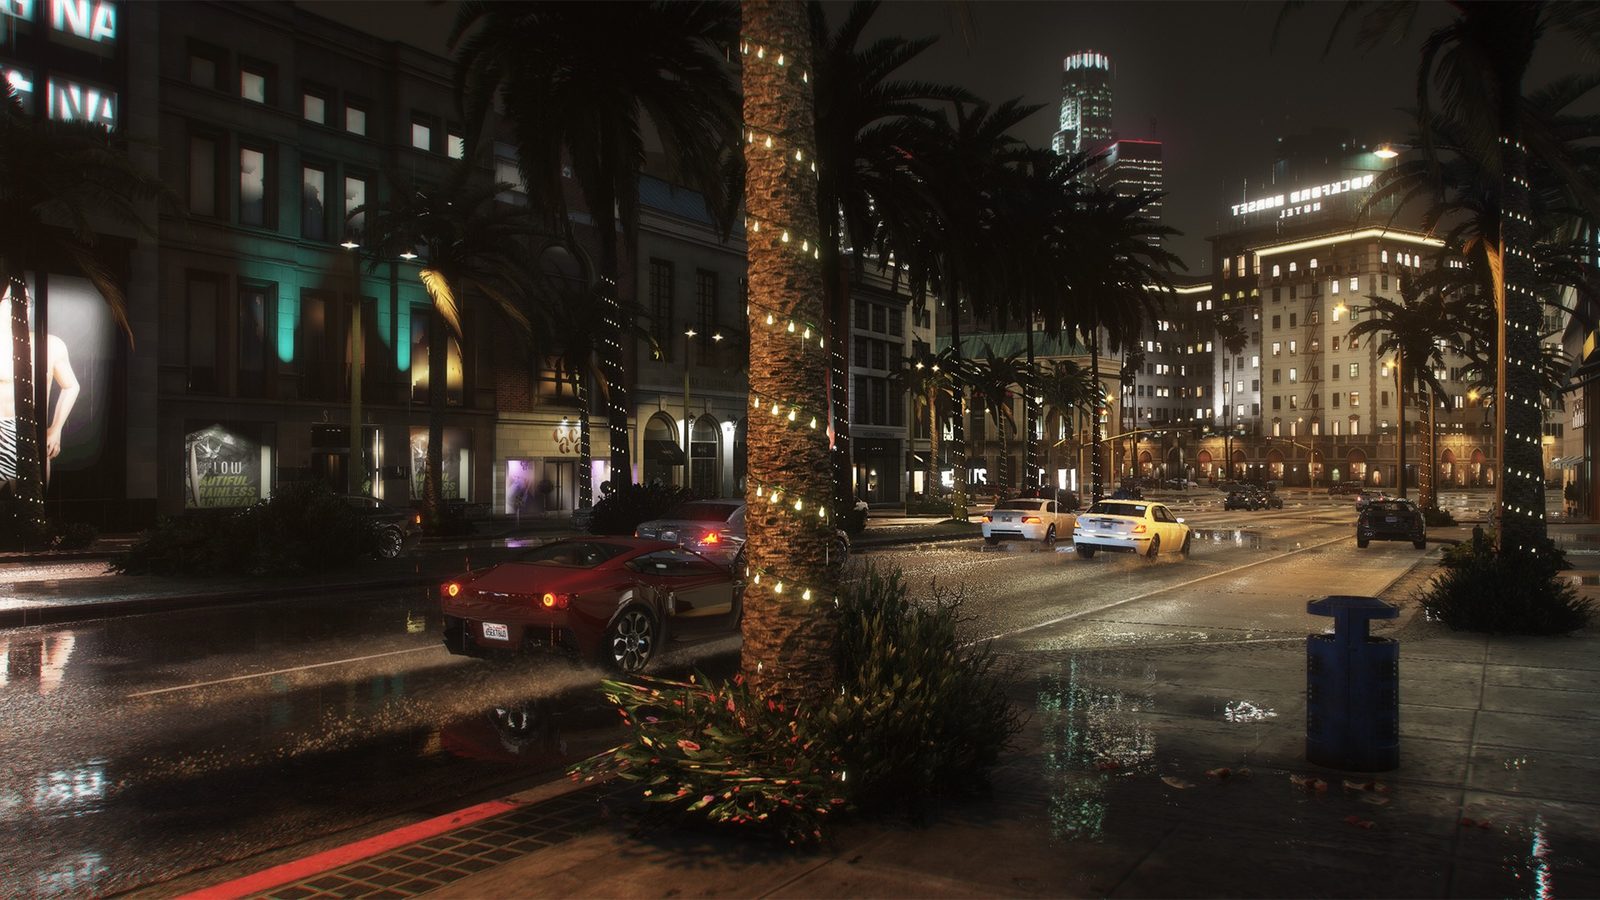 Grand Theft Auto 5 NaturalVision Evolved mod now available to